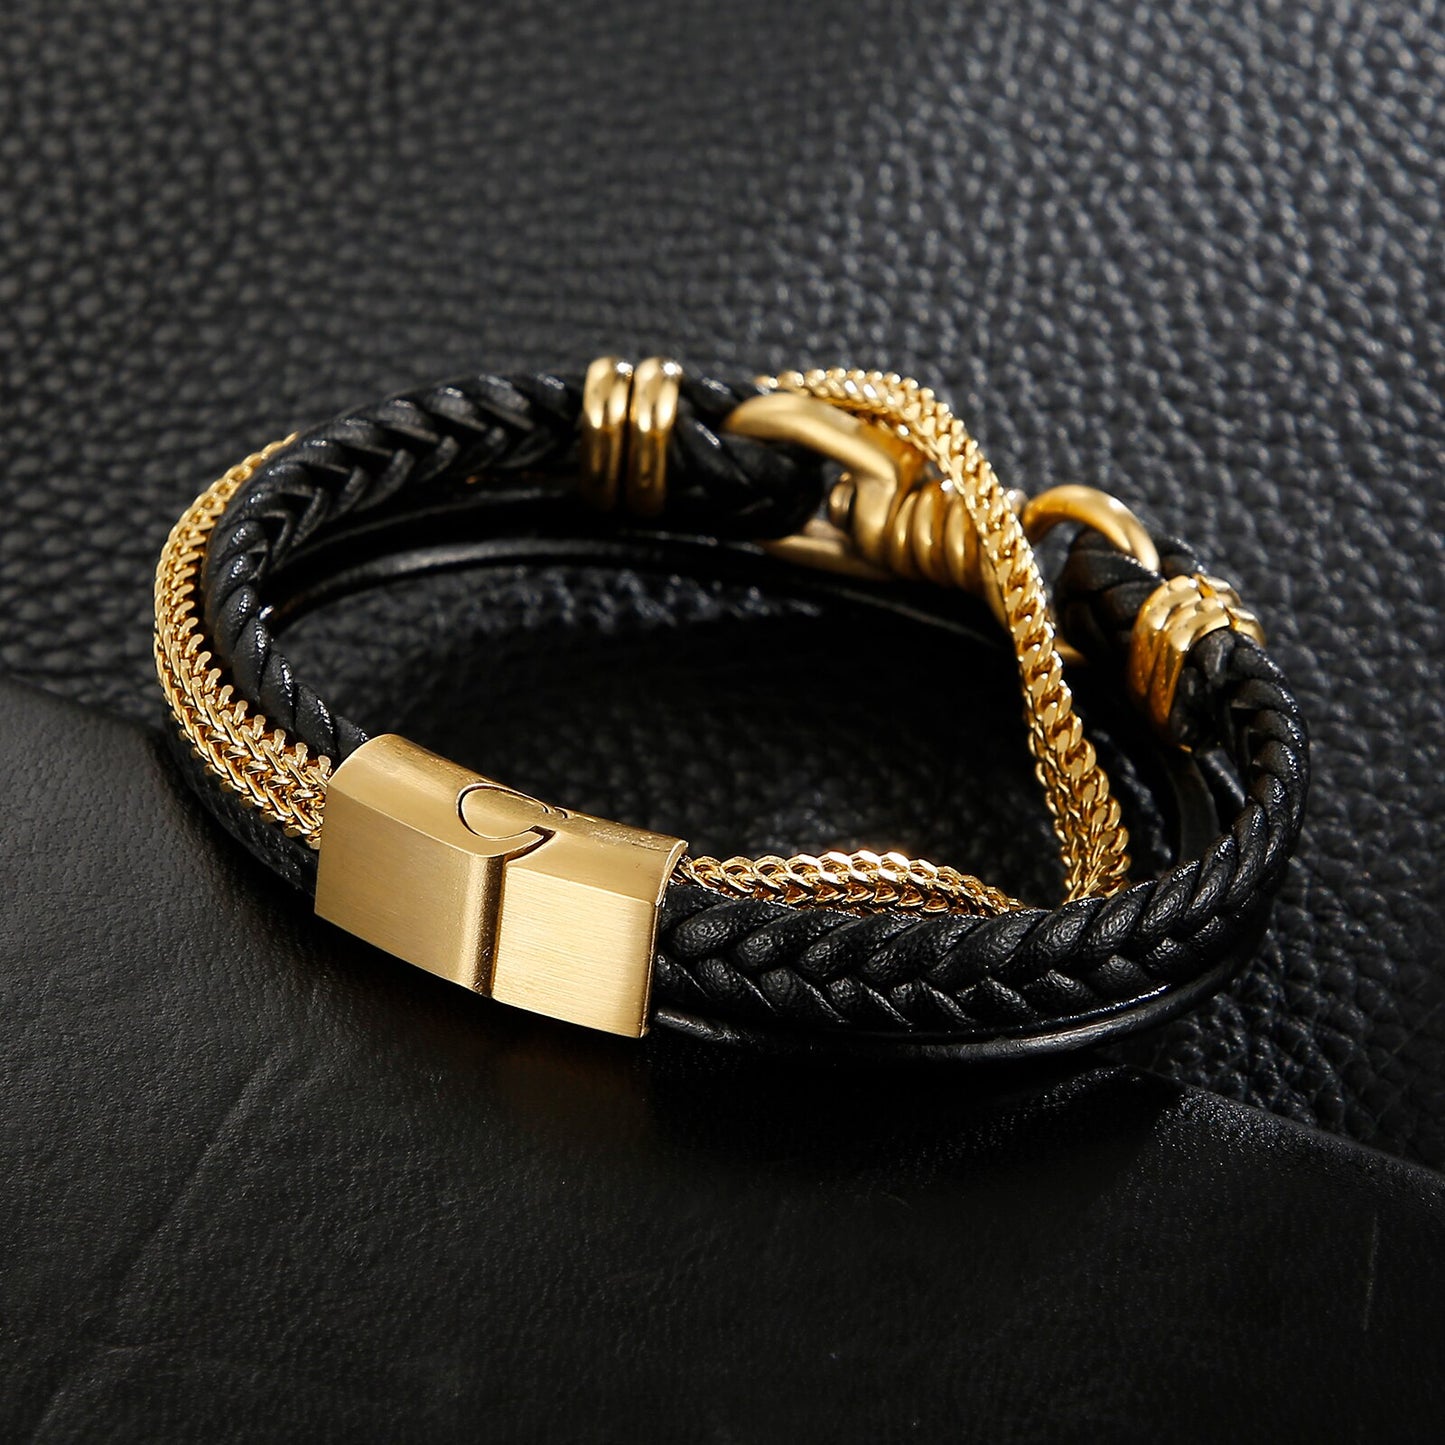 Multi-Layer Braided Leather Bracelet For Men Stainless Steel Link Chain and Rope Punk Fashion Black Bangle Jewelry